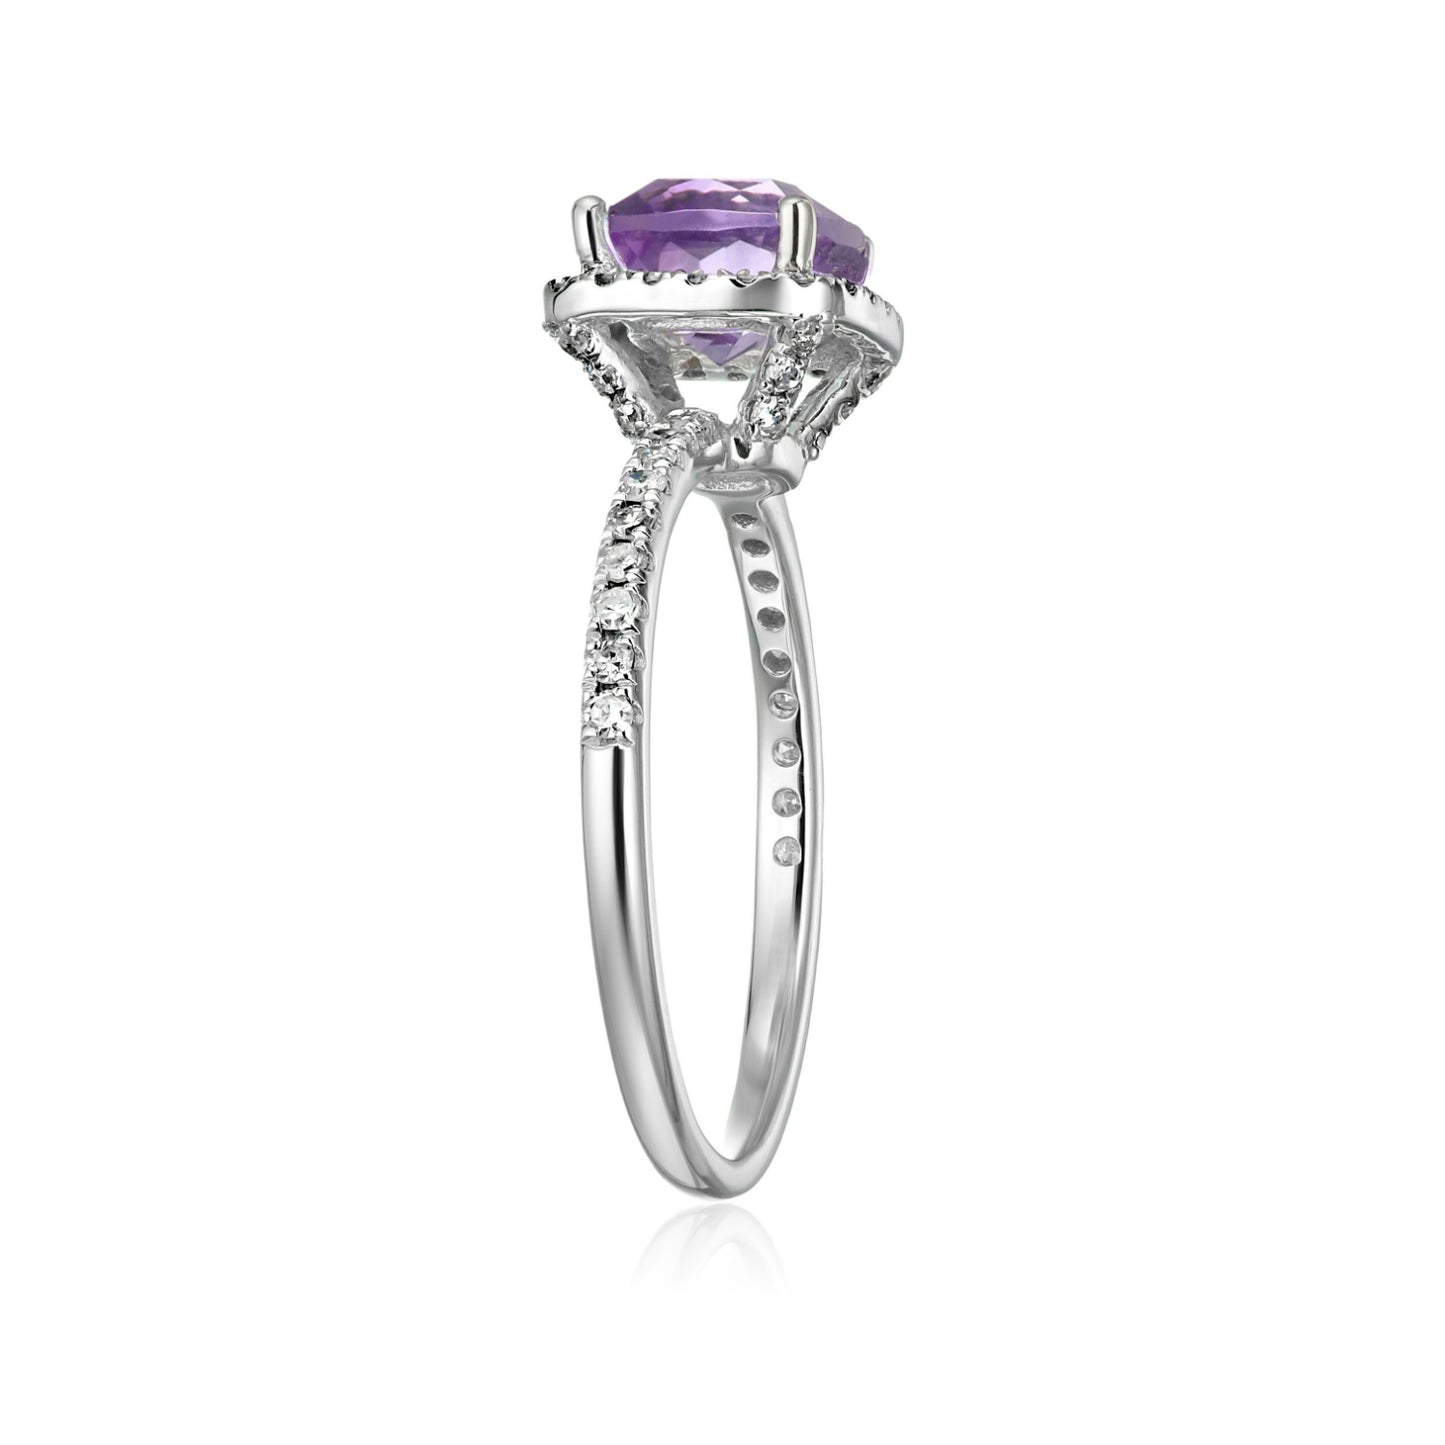 10k White Gold African Amethyst and Diamond Cushion Halo Engagement Ring (1/4cttw, H-I Color, I1-I2 Clarity), - pinctore